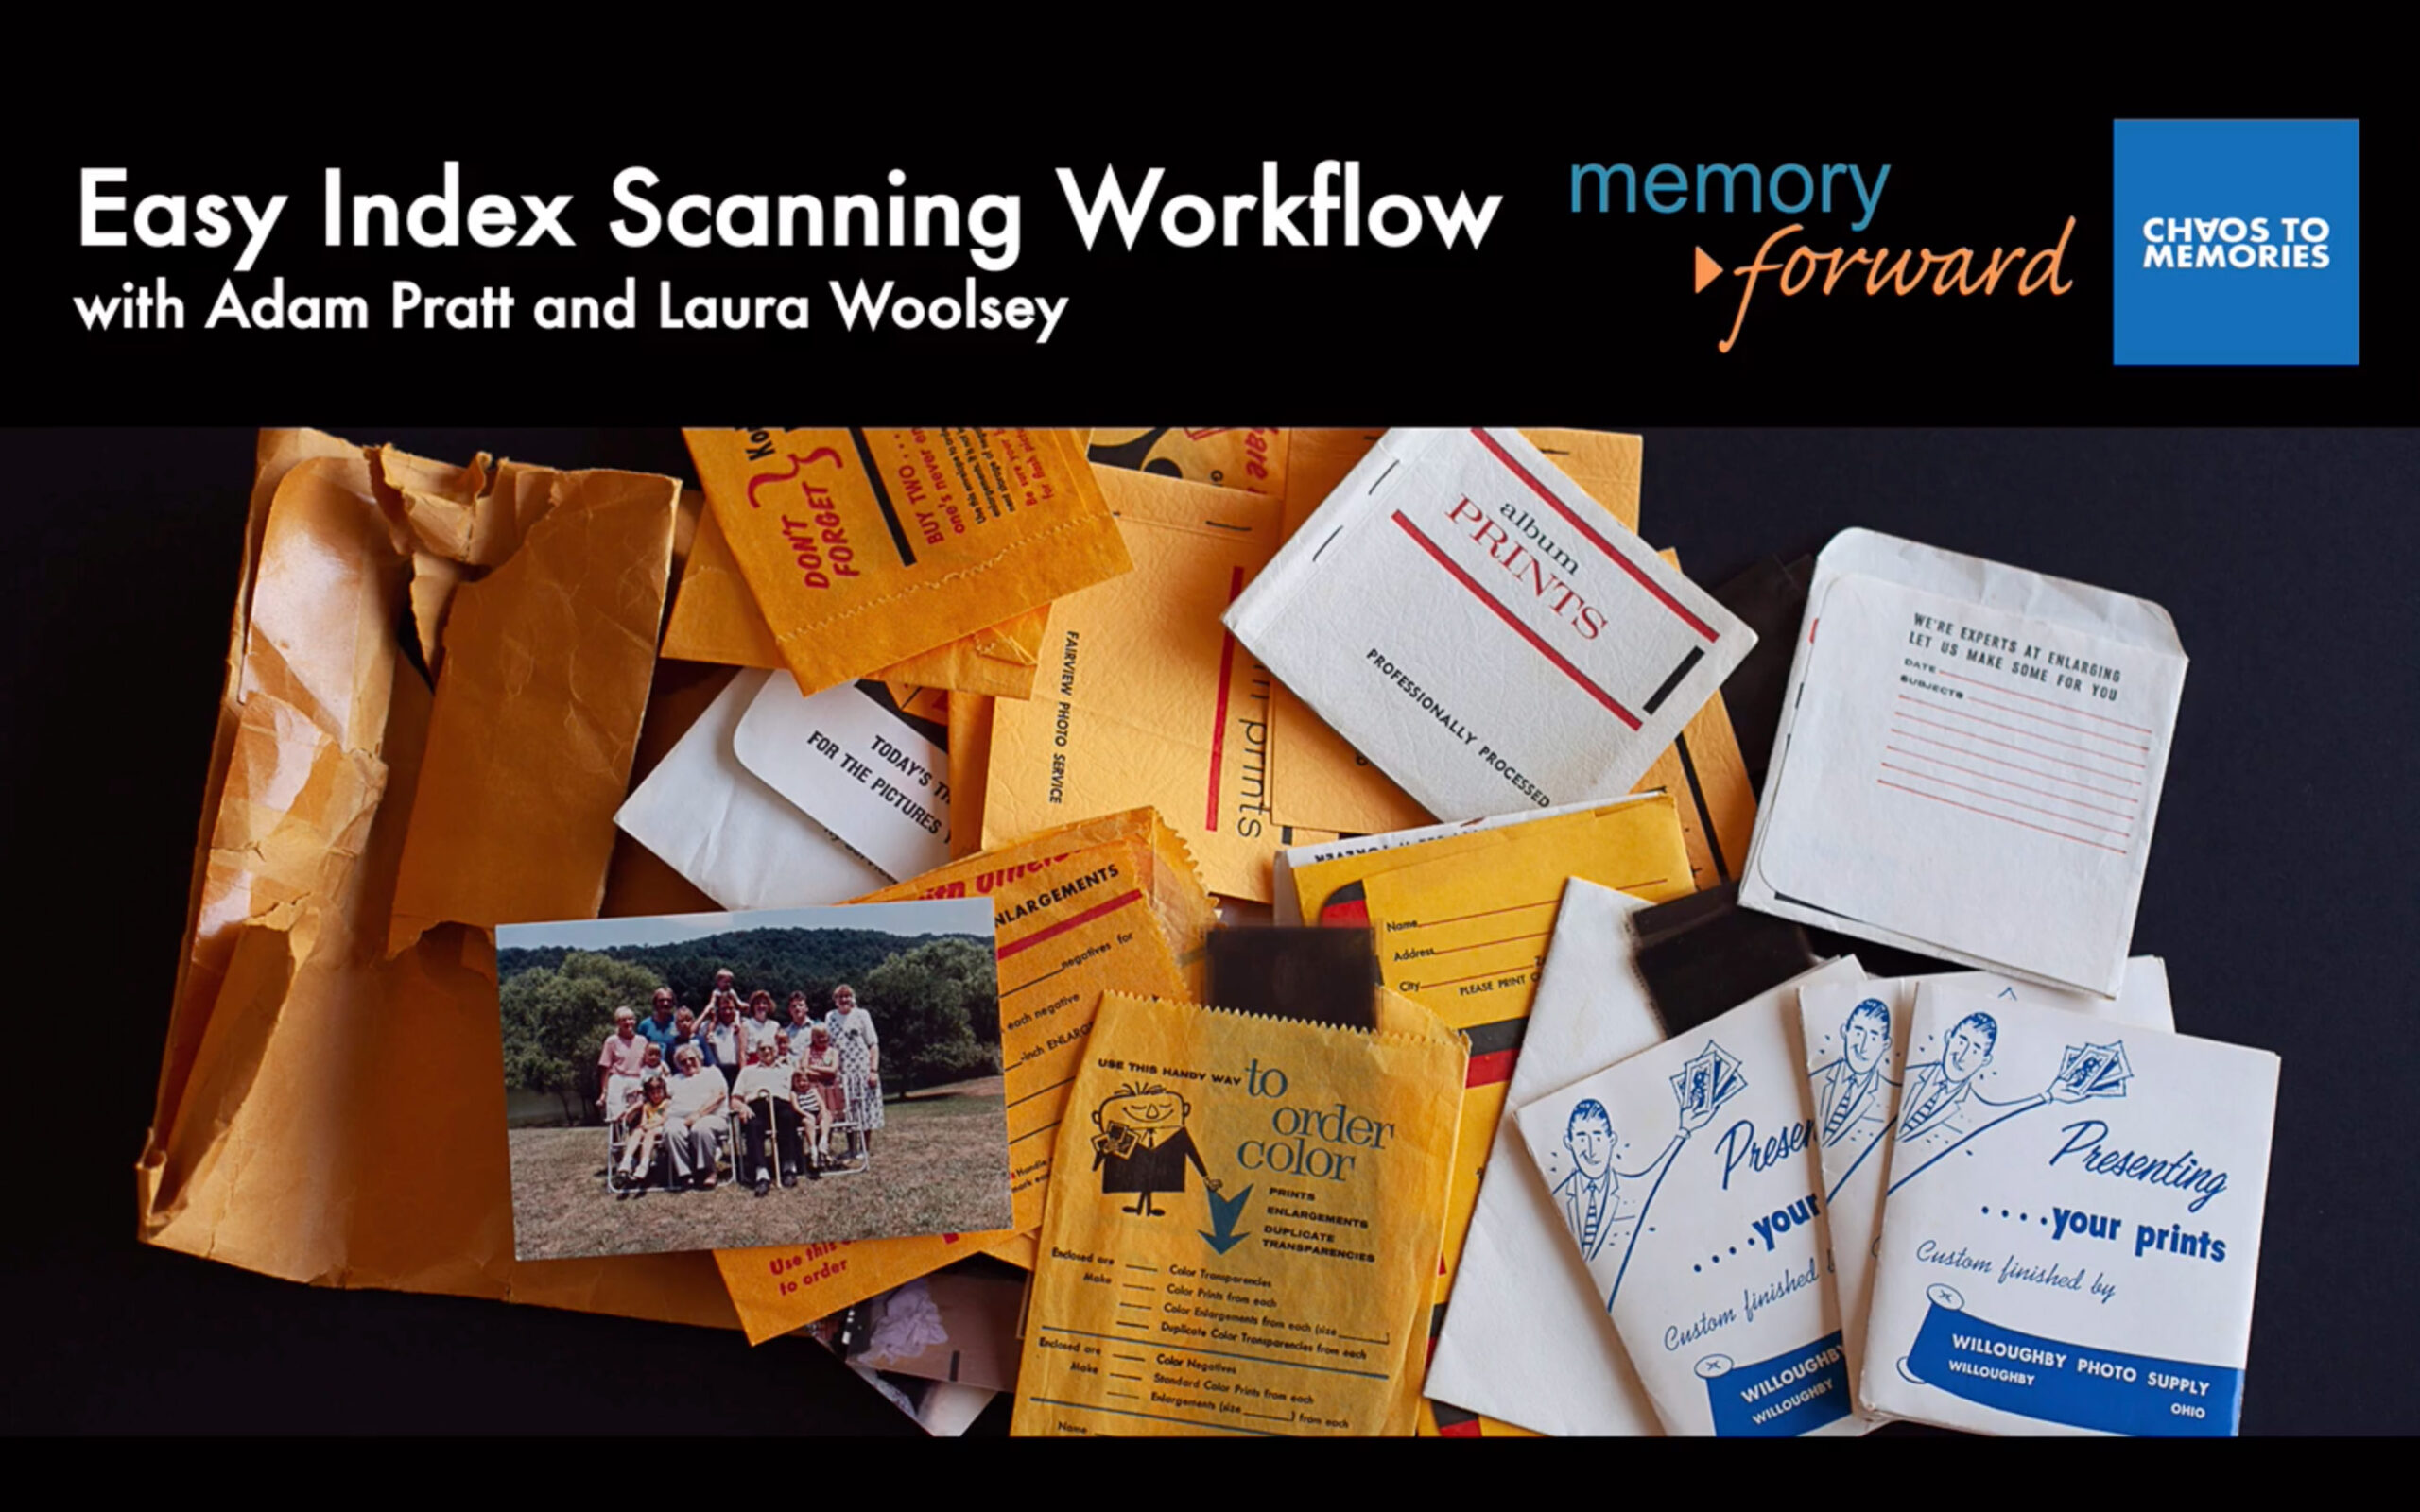 Easy Index Scanning Workflow with Adam Pratt and Laura Woolsey